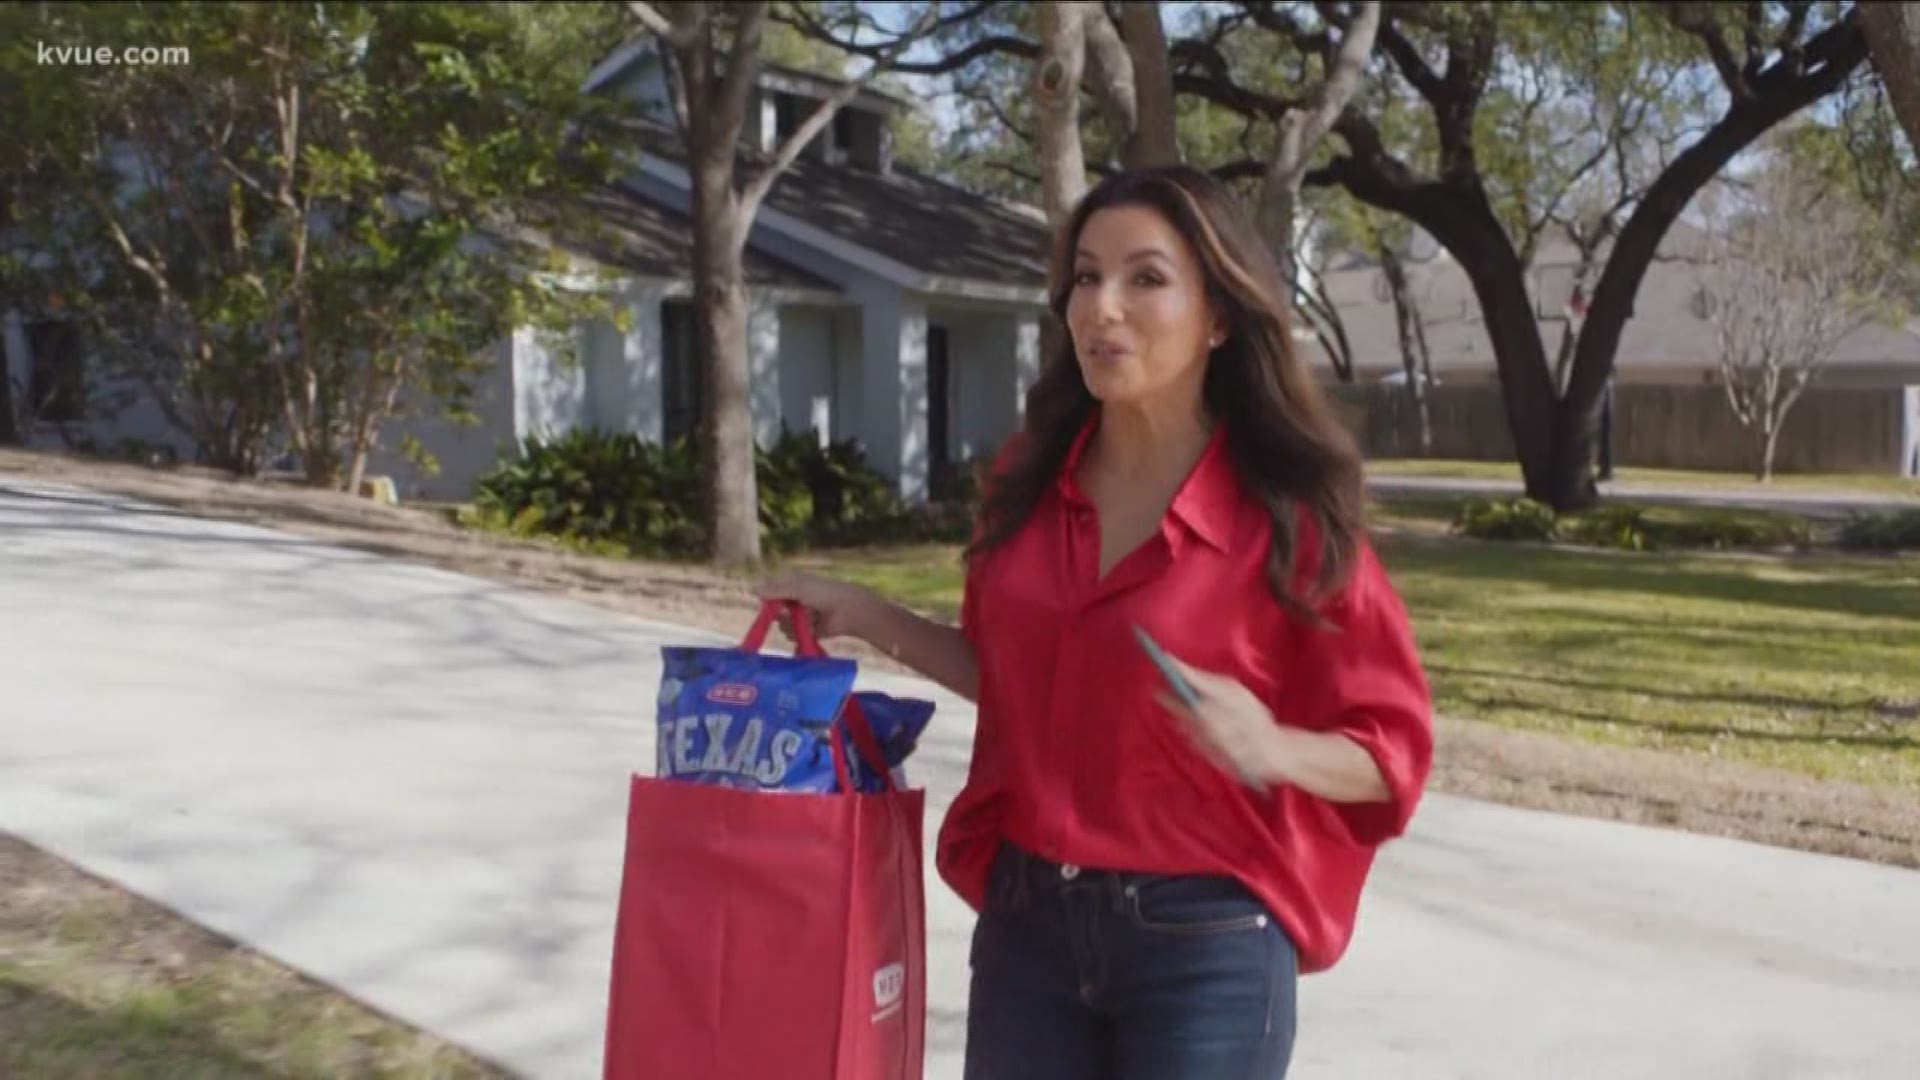 H-E-B is offering one lucky Texan a chance to win a lifetime supply of free groceries during the commercial.